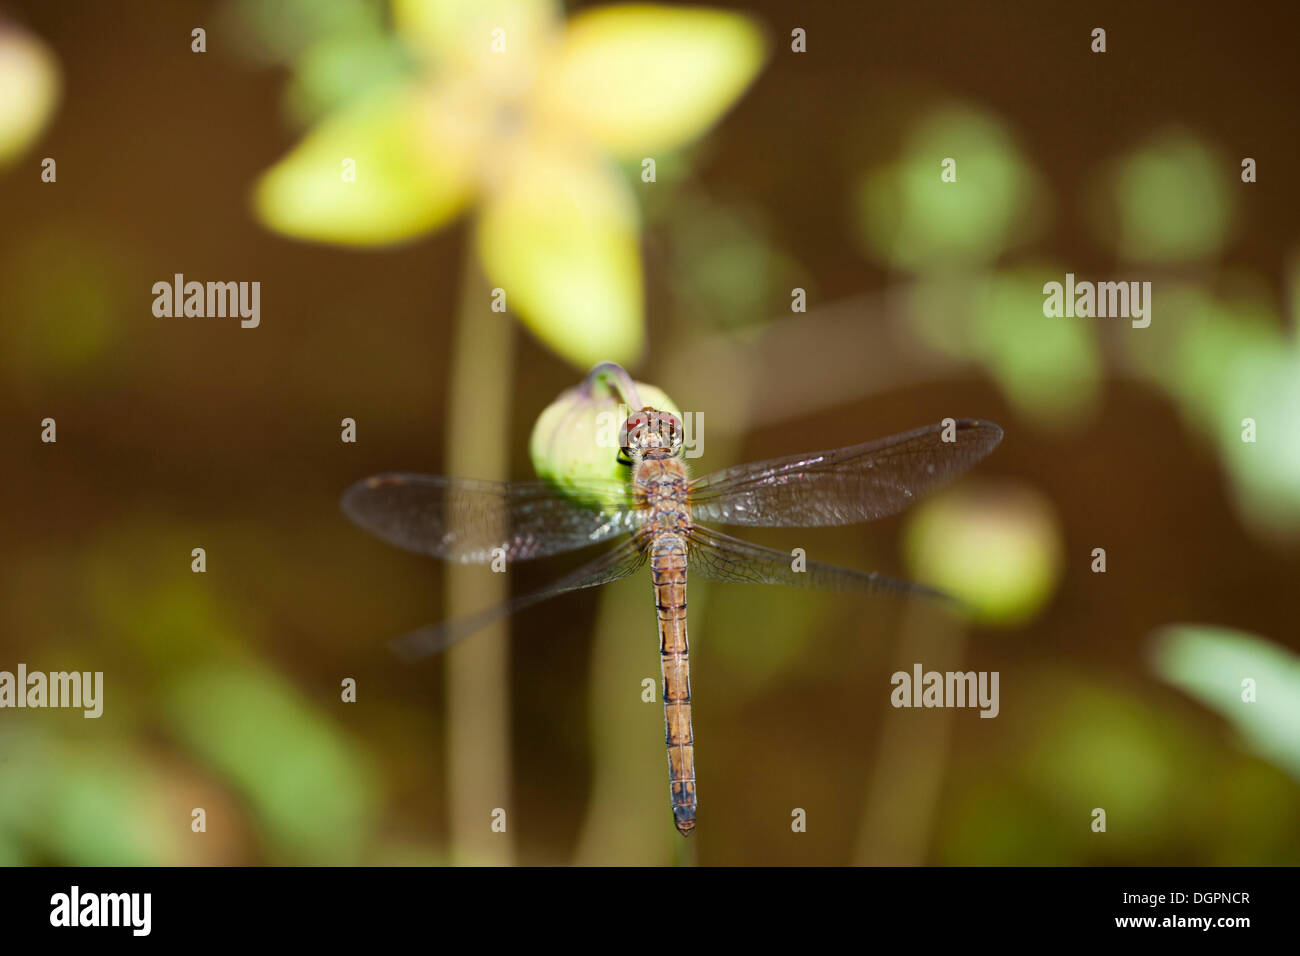 Dragonfly on the flower of a Brown Clematis (Clematis barbellata), Botanical Garden, Berlin Stock Photo